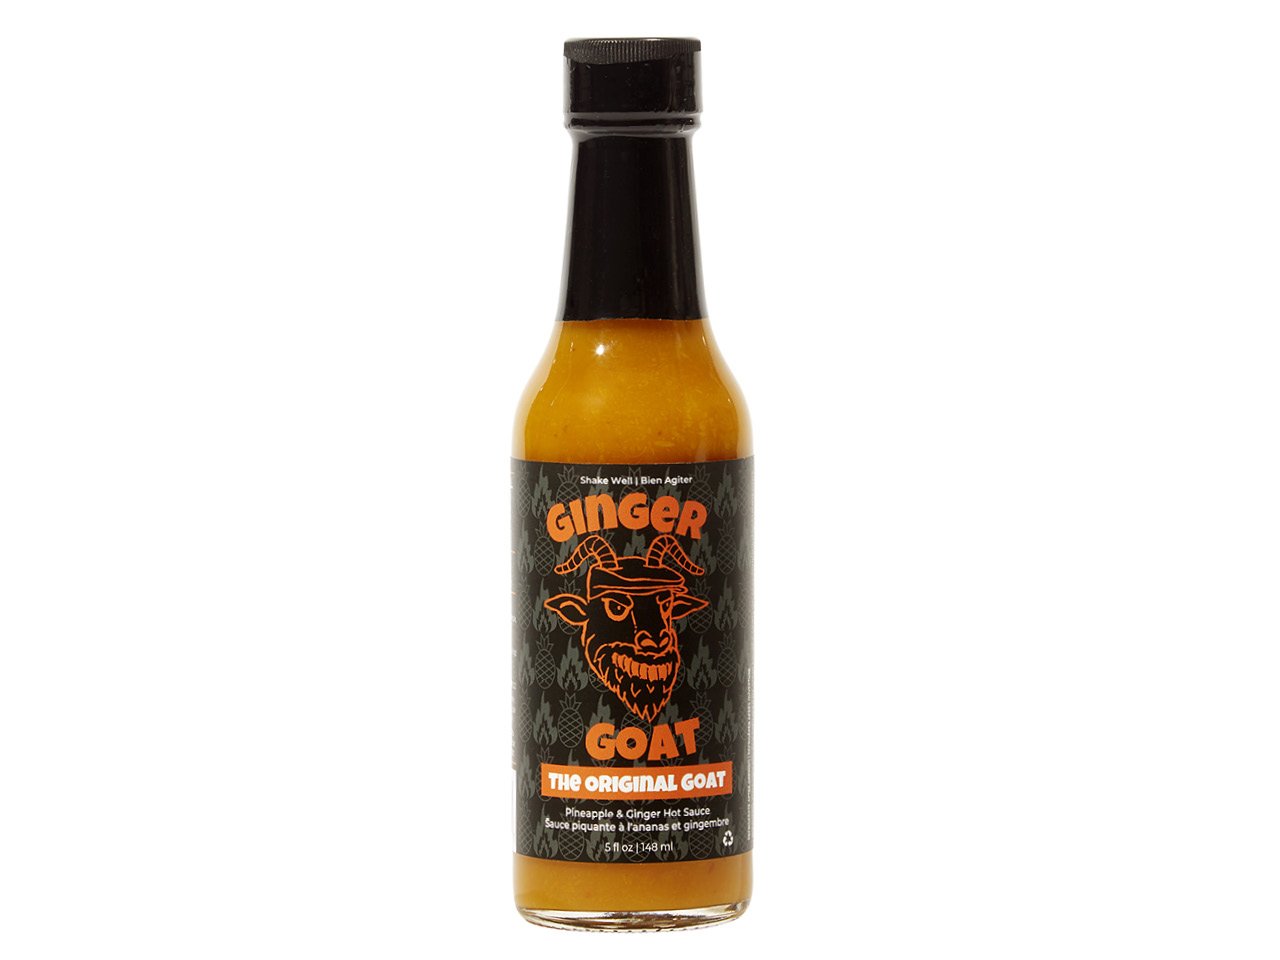 Tall bottle with orange liquid inside and a black label with orange writing reading "Ginger Goat" and an illustration of an angry goat head